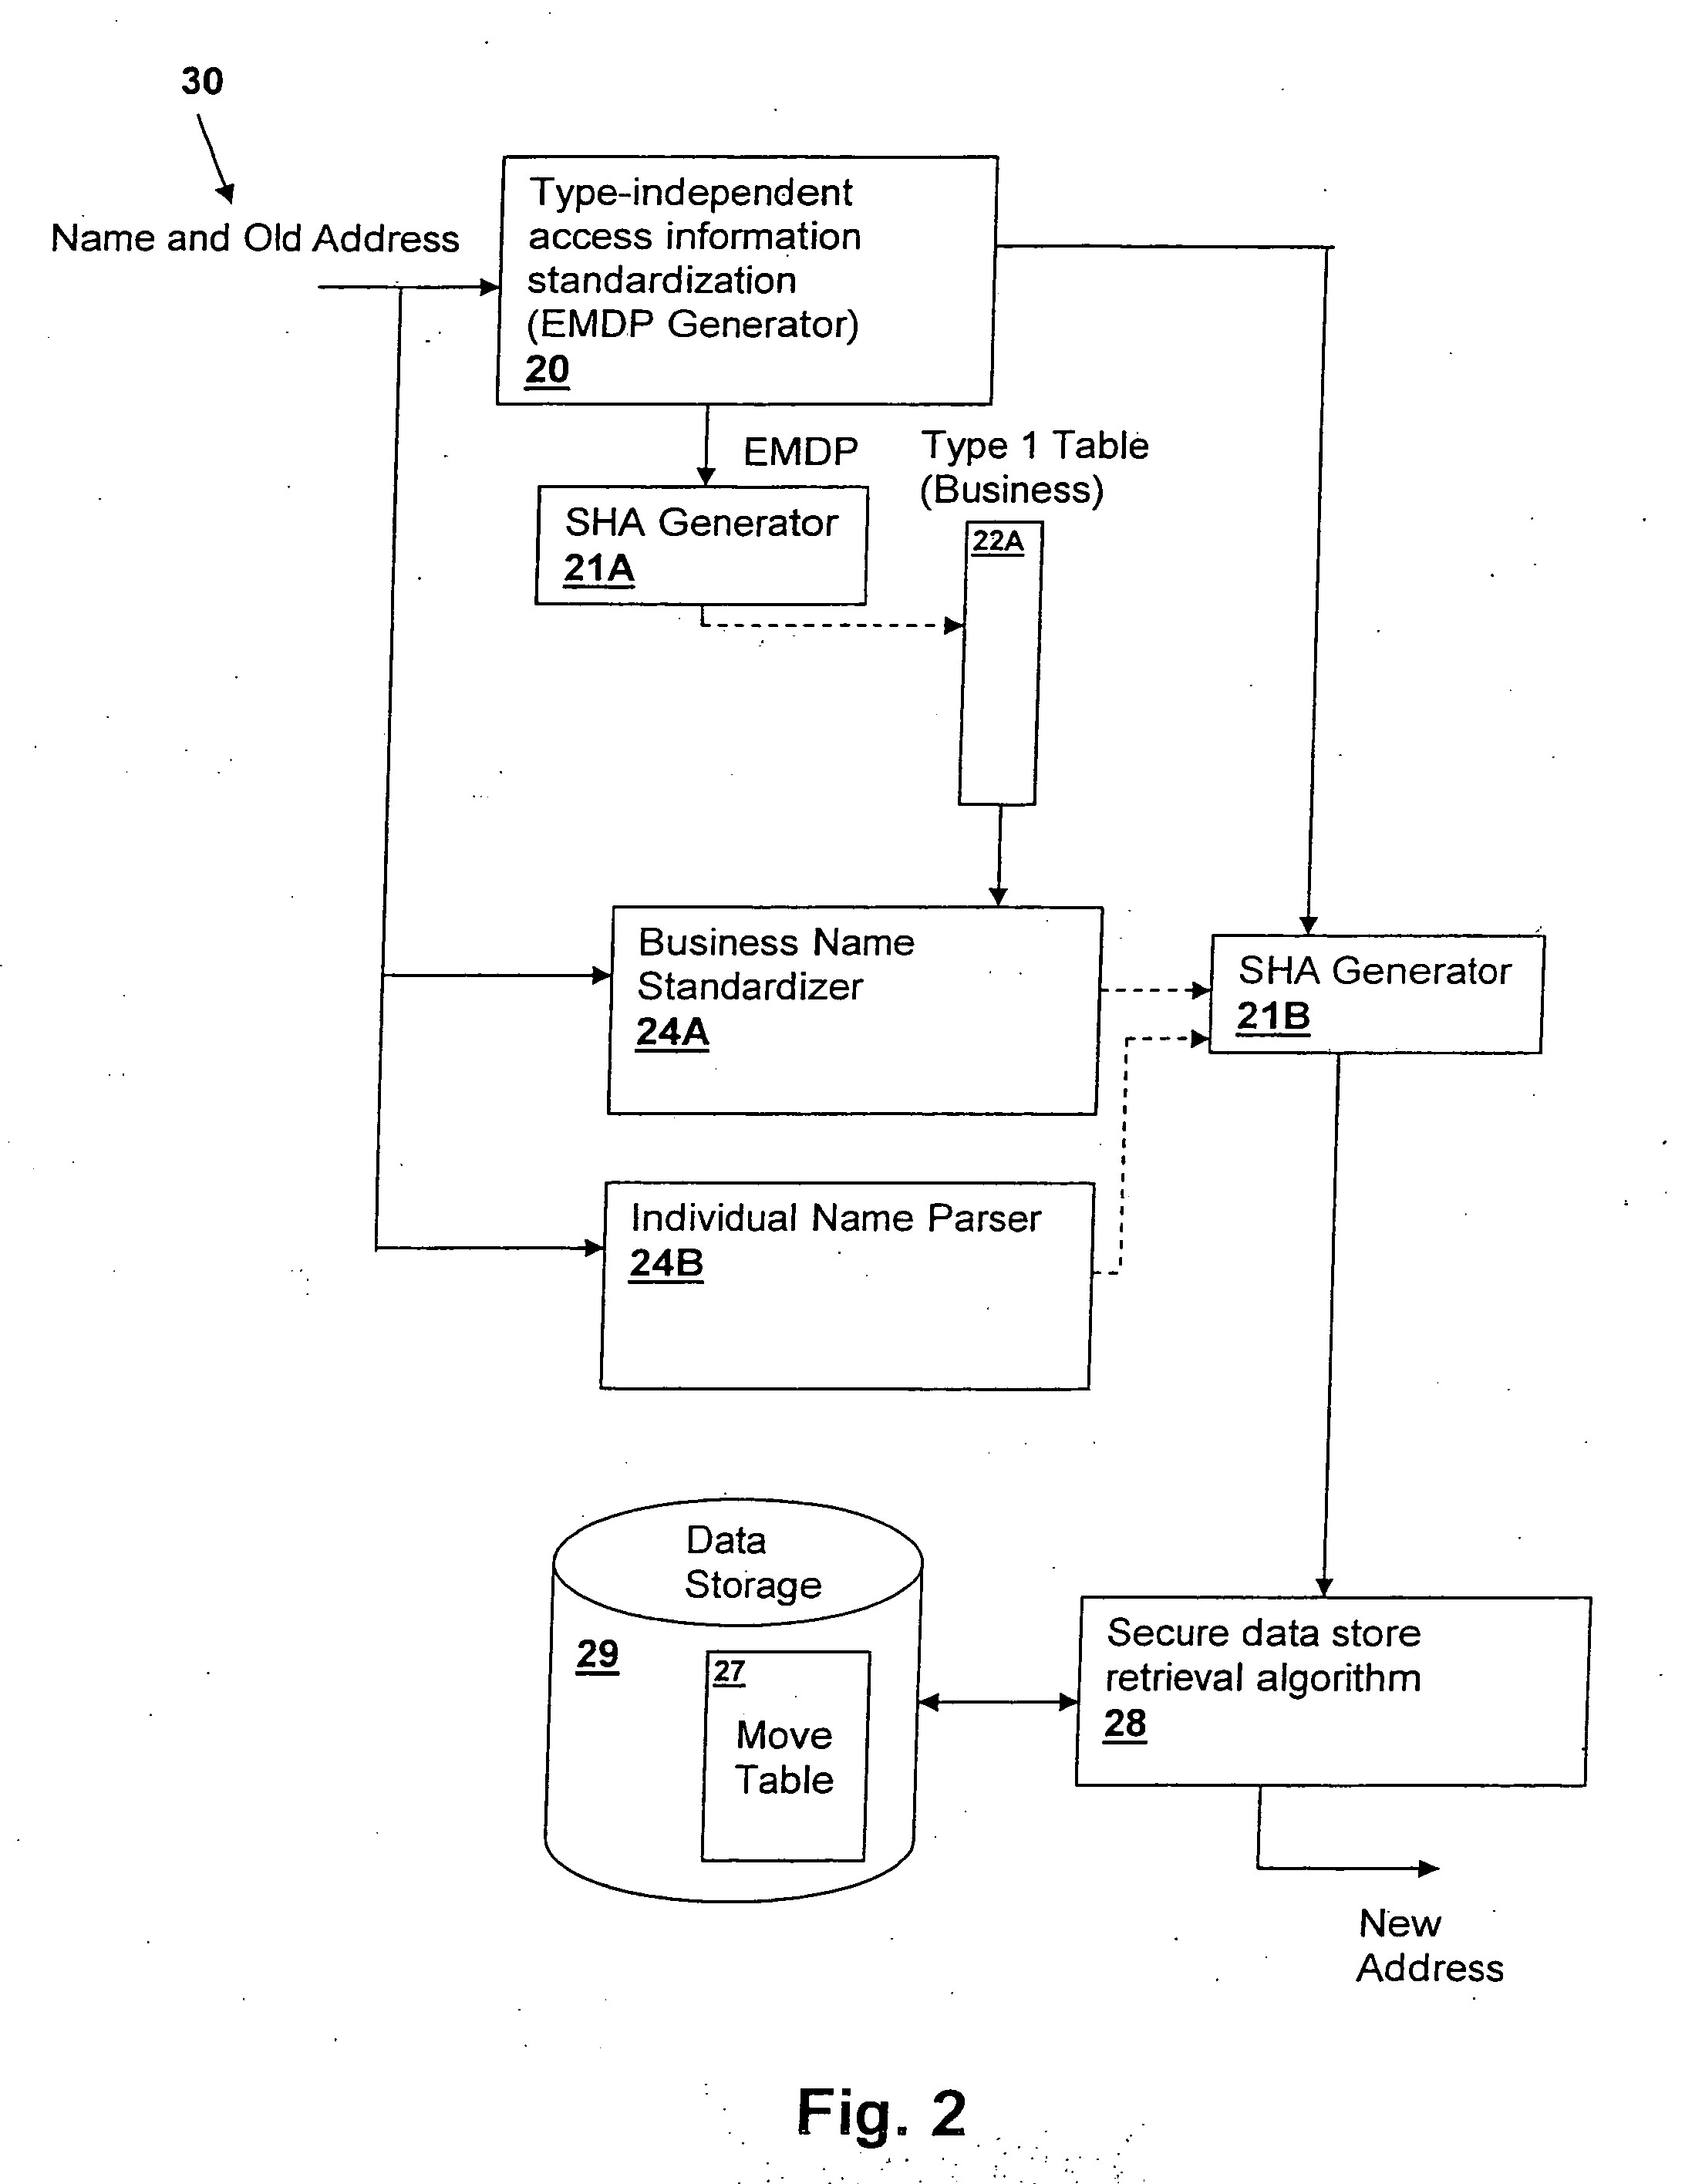 Method and system for efficientyly retrieving secured data by securely pre-processing provided access information